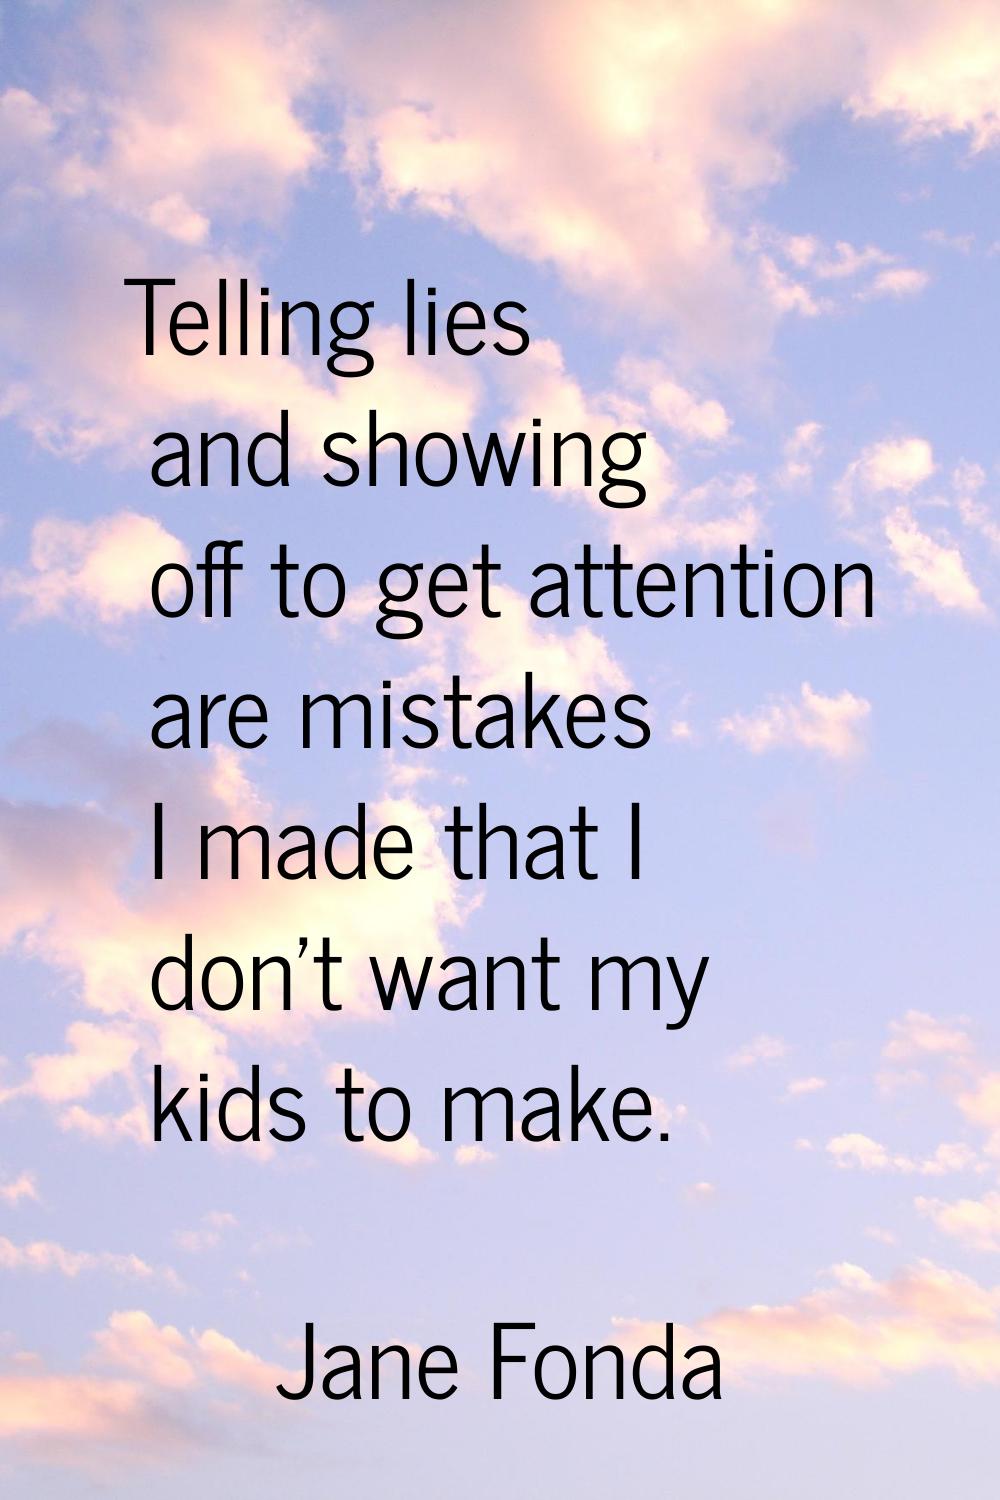 Telling lies and showing off to get attention are mistakes I made that I don't want my kids to make